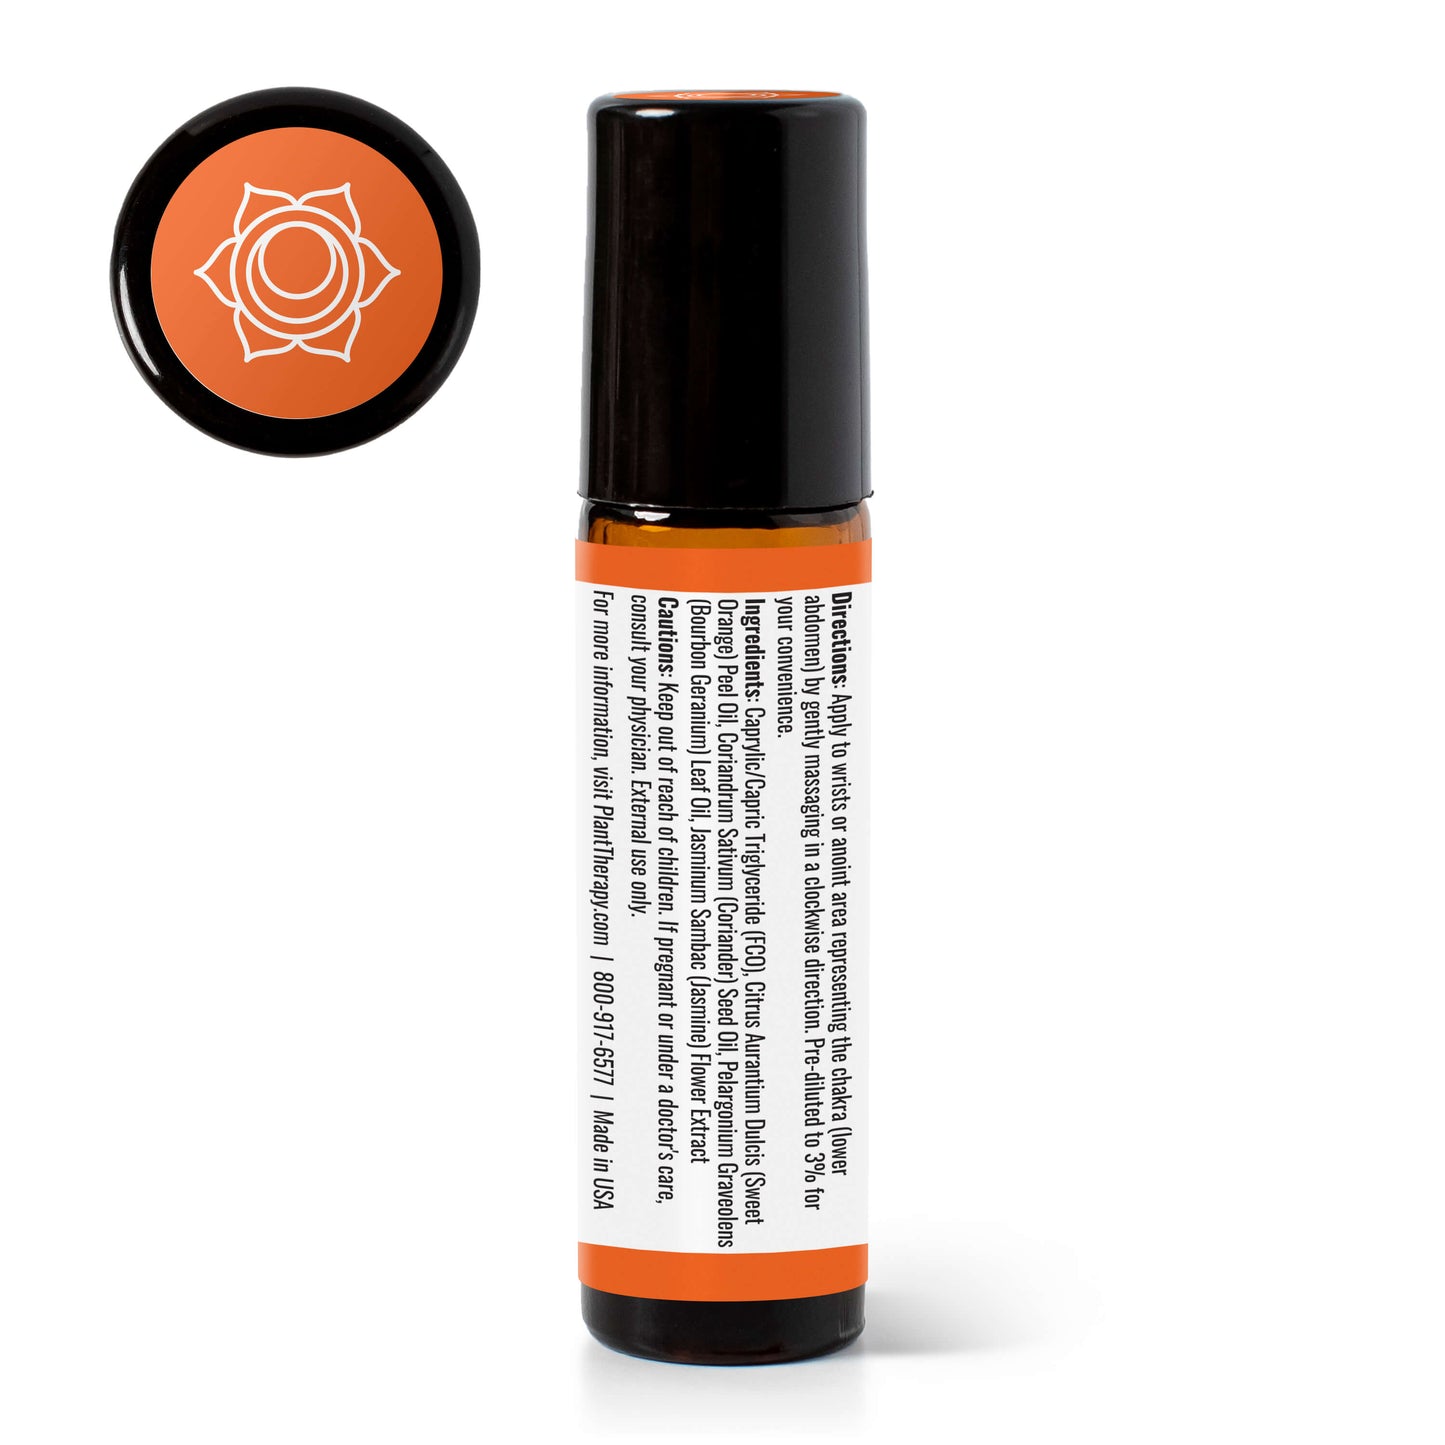 Joyful Creation (Sacral Chakra) Essential Oil Pre-Diluted Roll-On